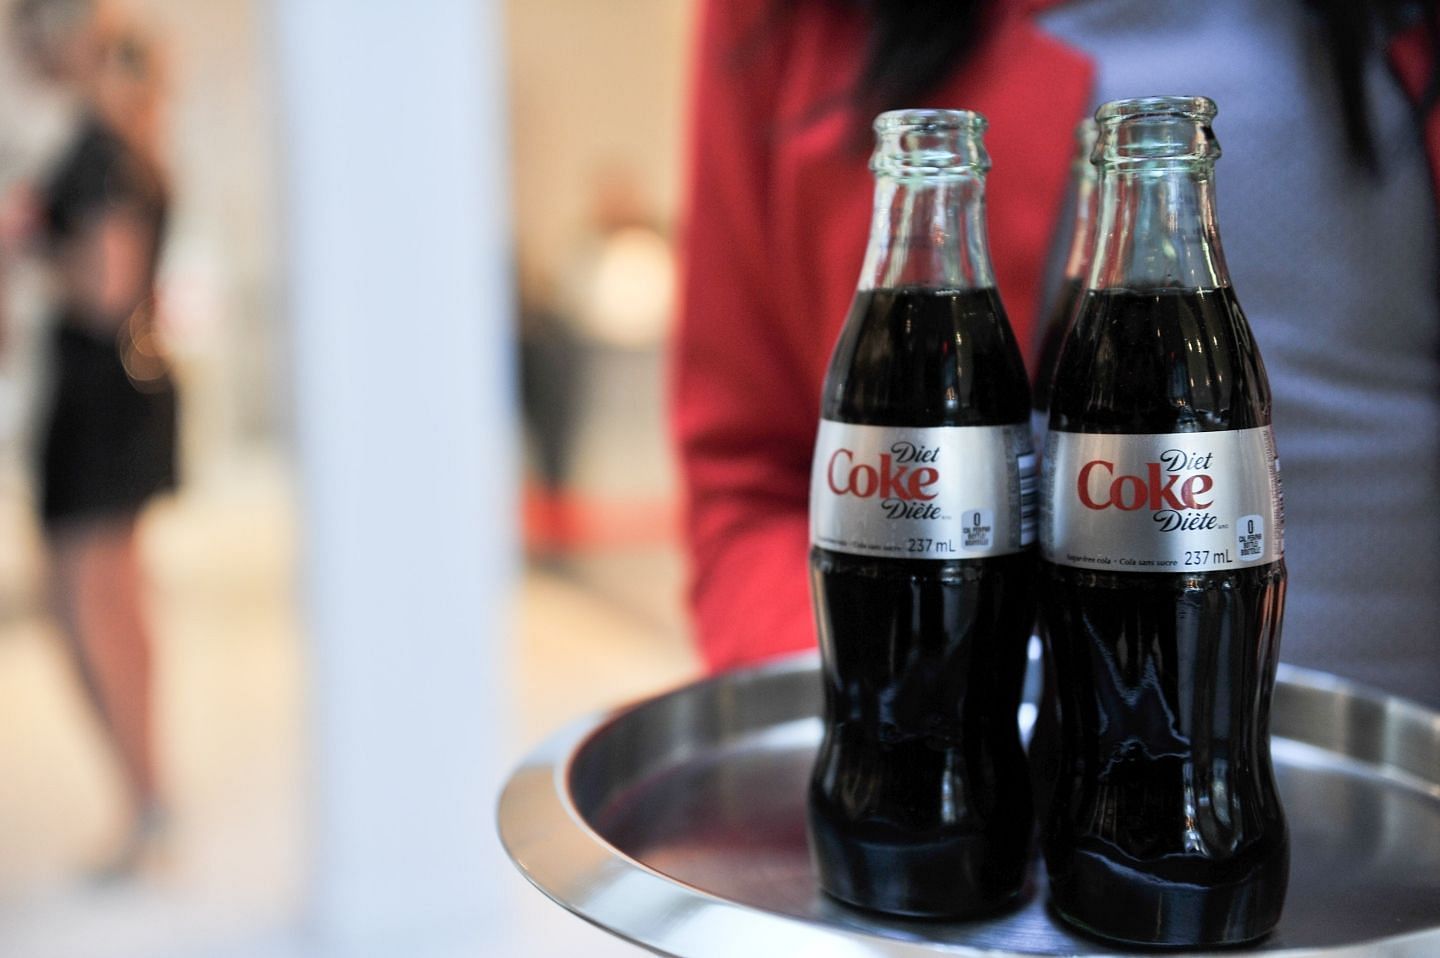 How diet coke & its addictive nature takes toll on your body within 60 minutes?